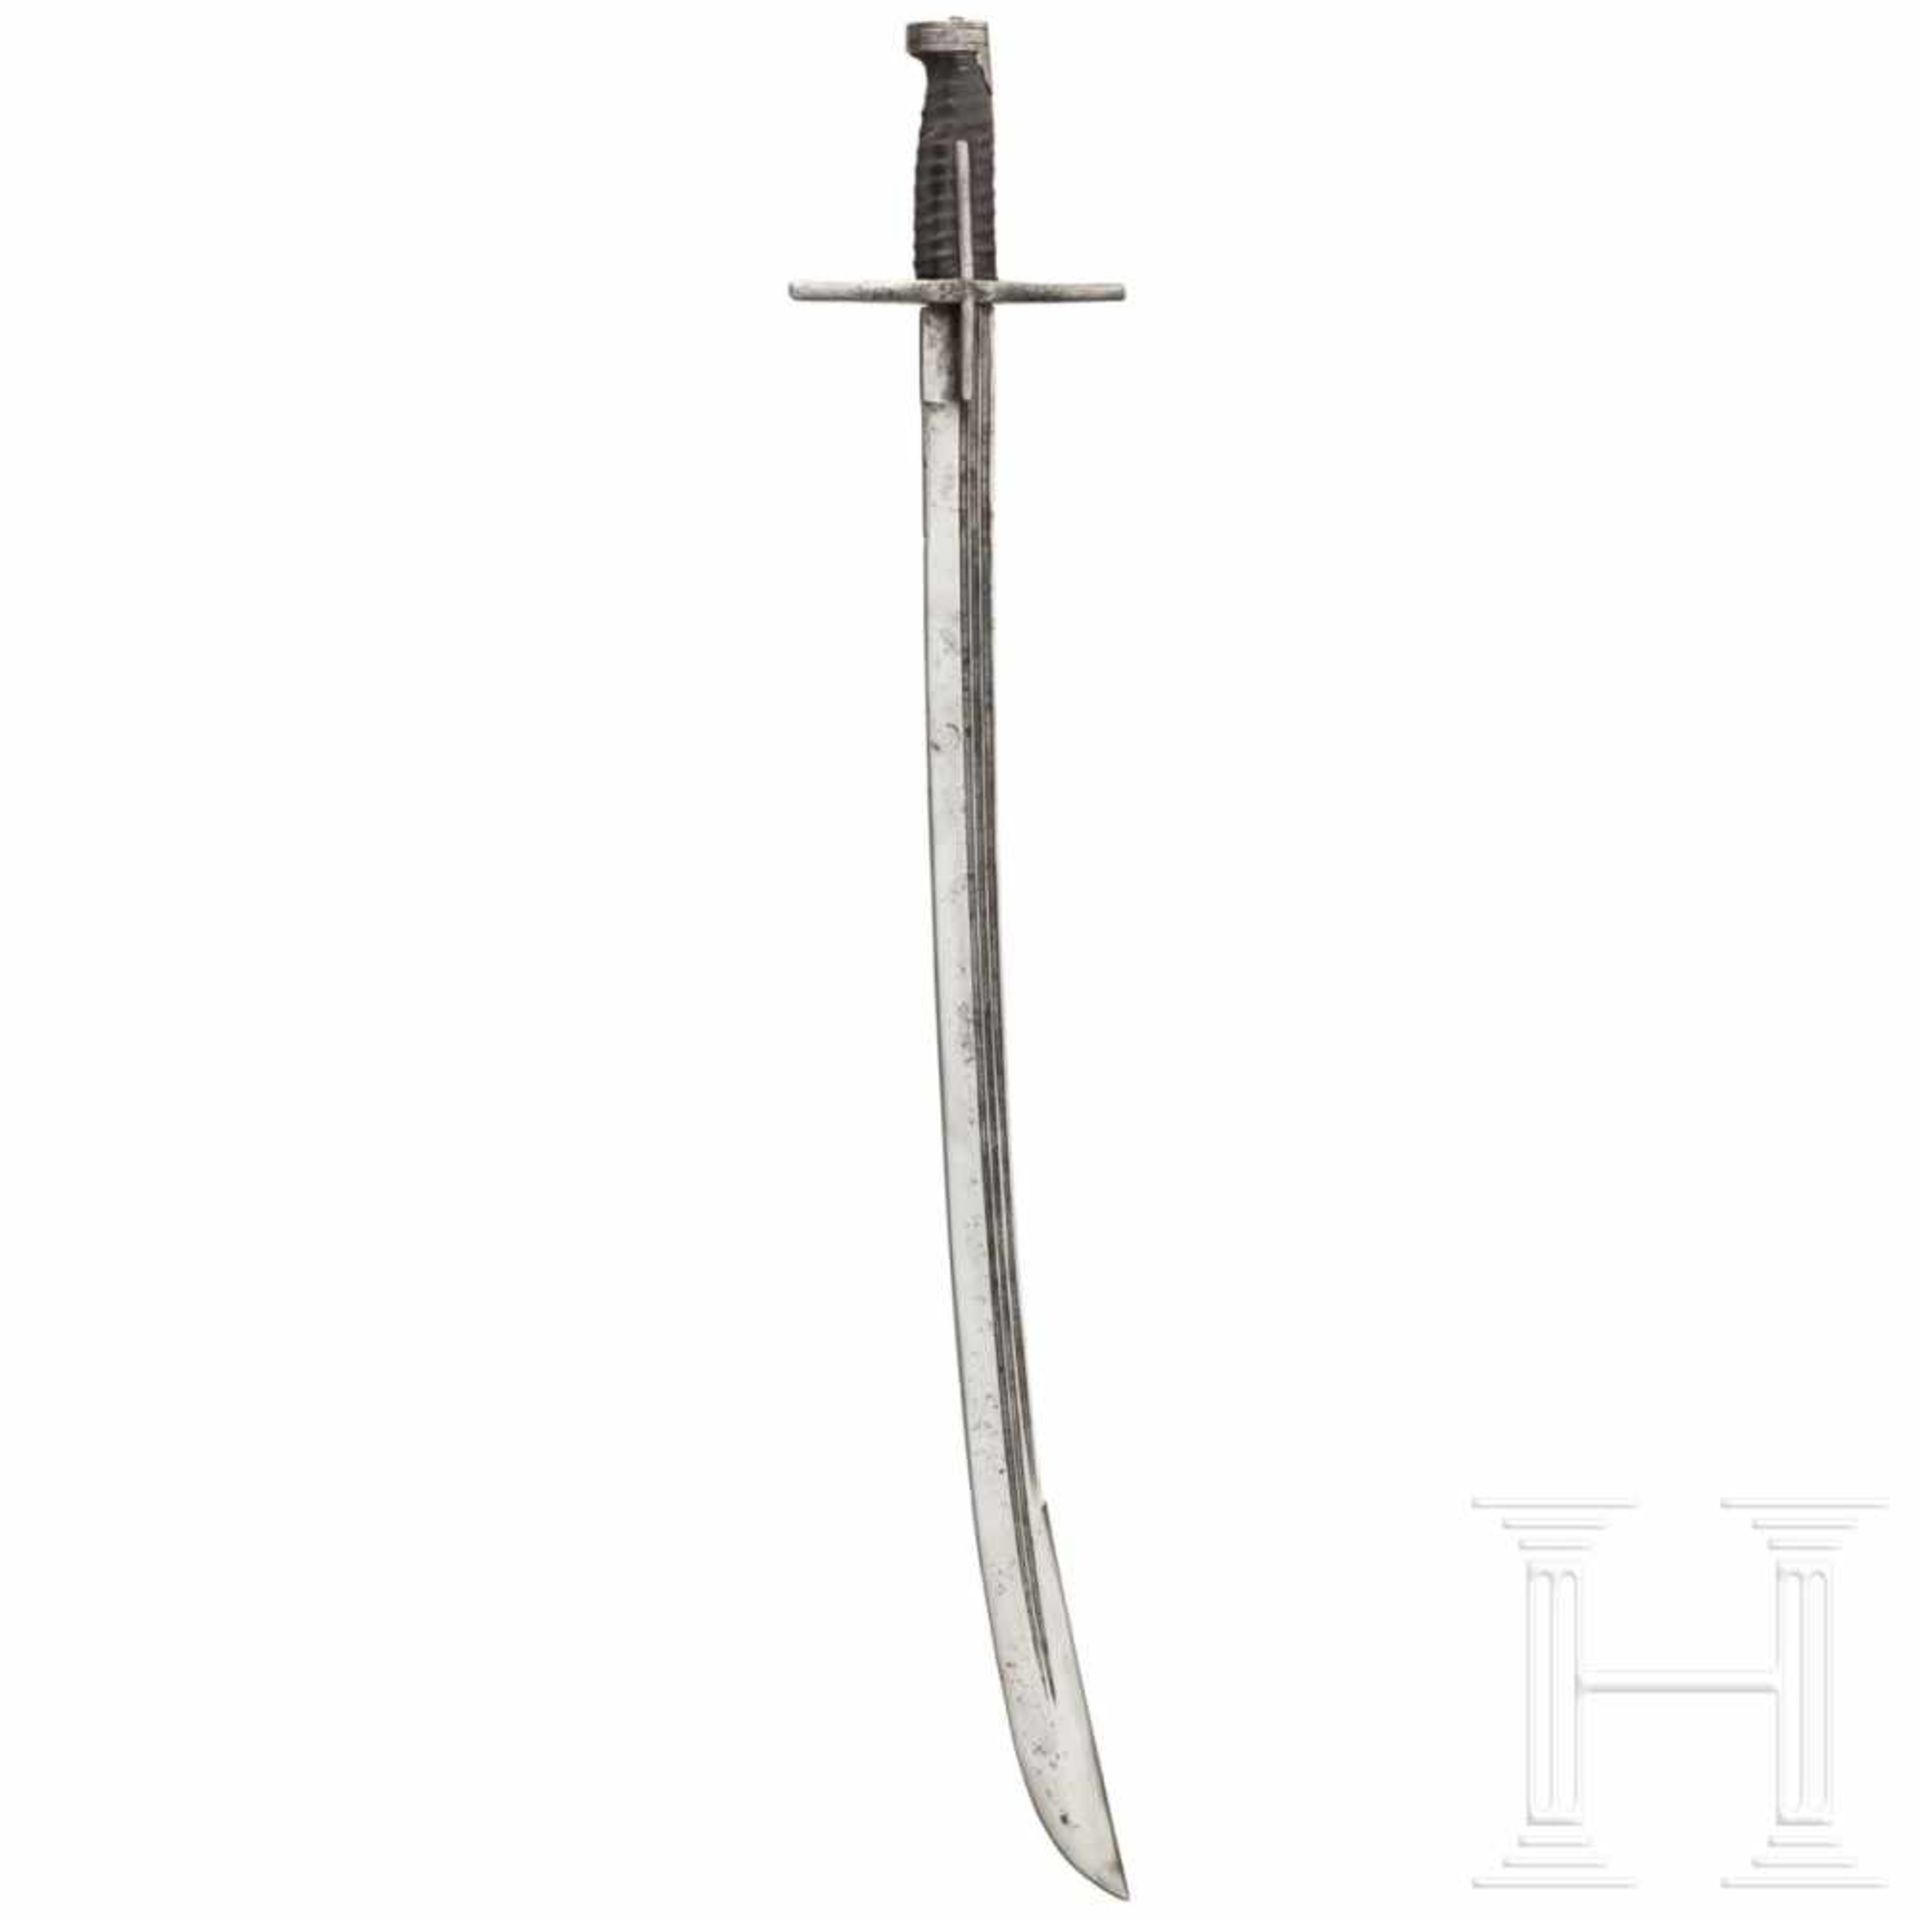 A Hungarian sabre, early 17th centuryBroad curved blade with distinct yelmen, deep crescent-shaped